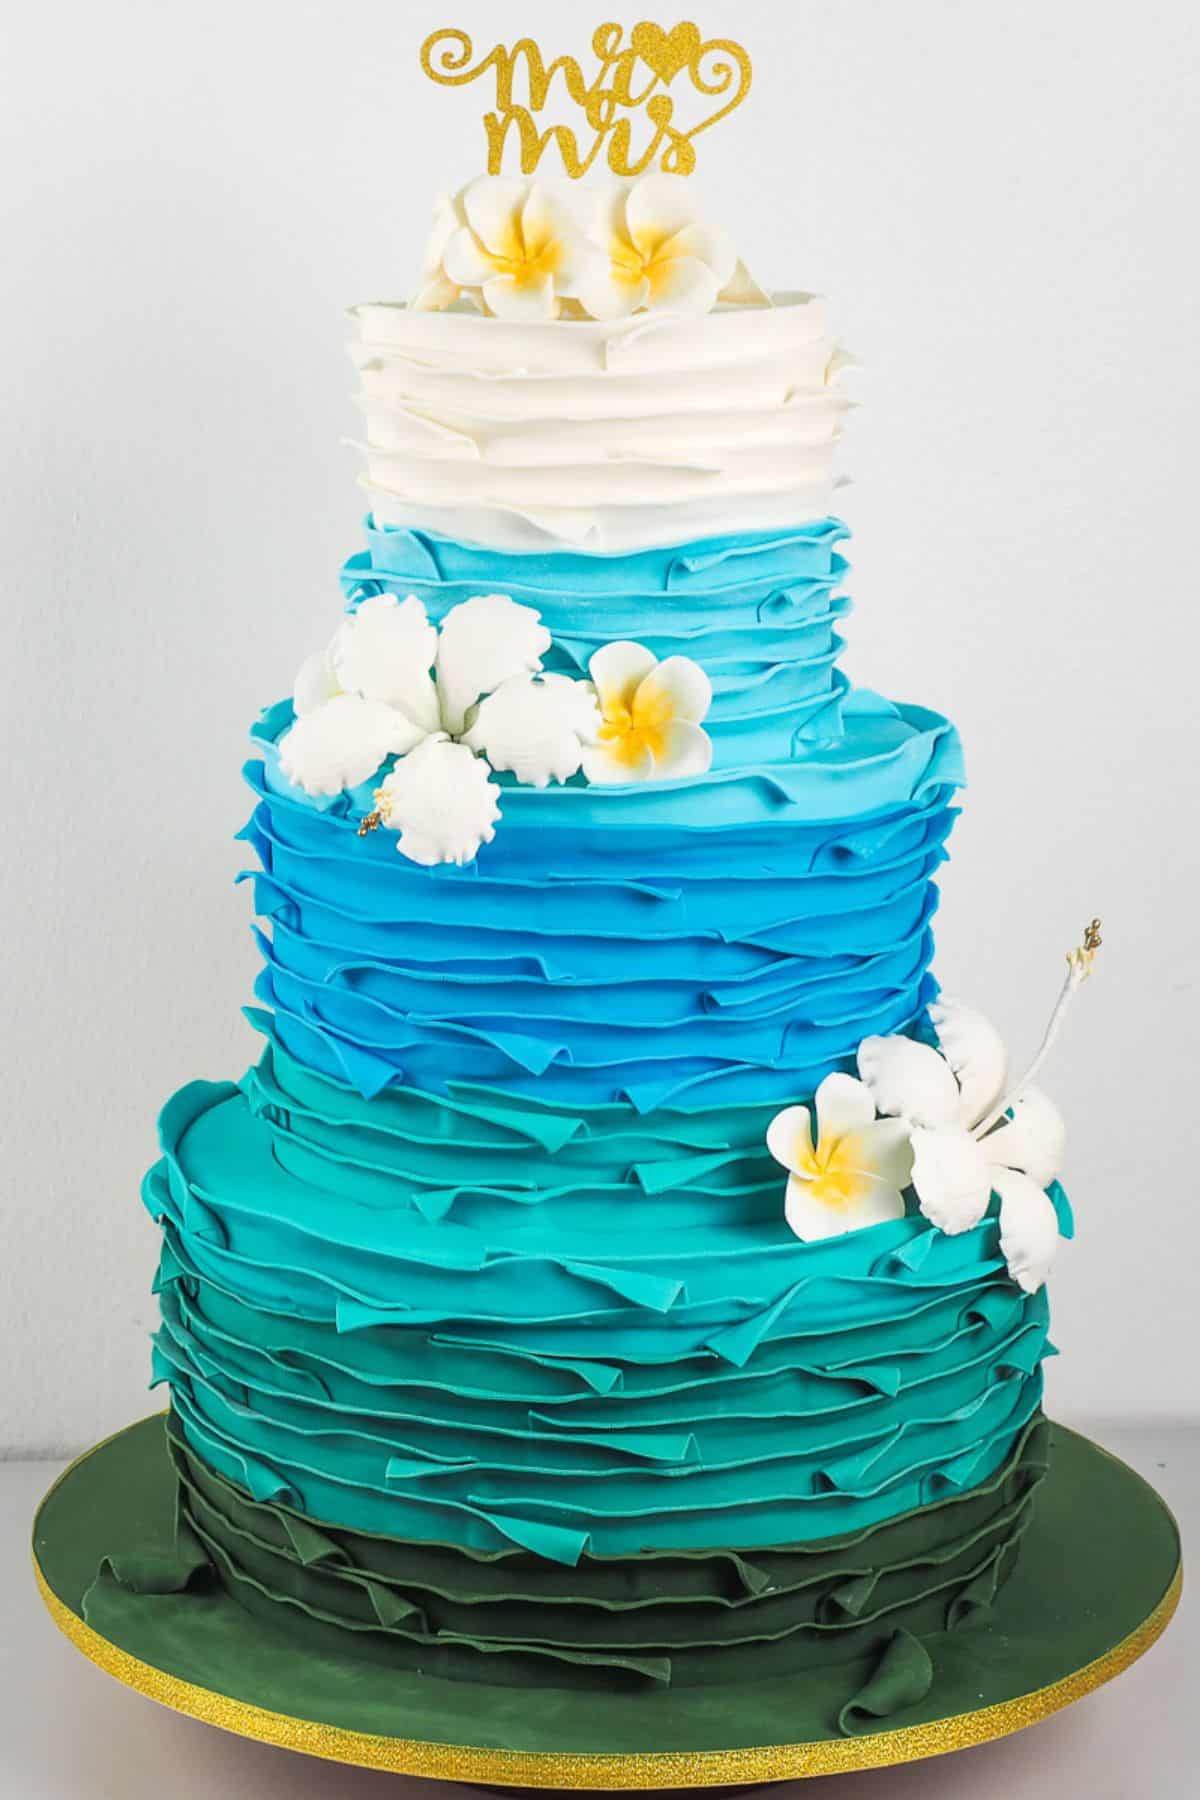 A 3 tier cake decorated in blue and turquoise and plumeria and hibiscus, with and Mr and Mrs cake topper.